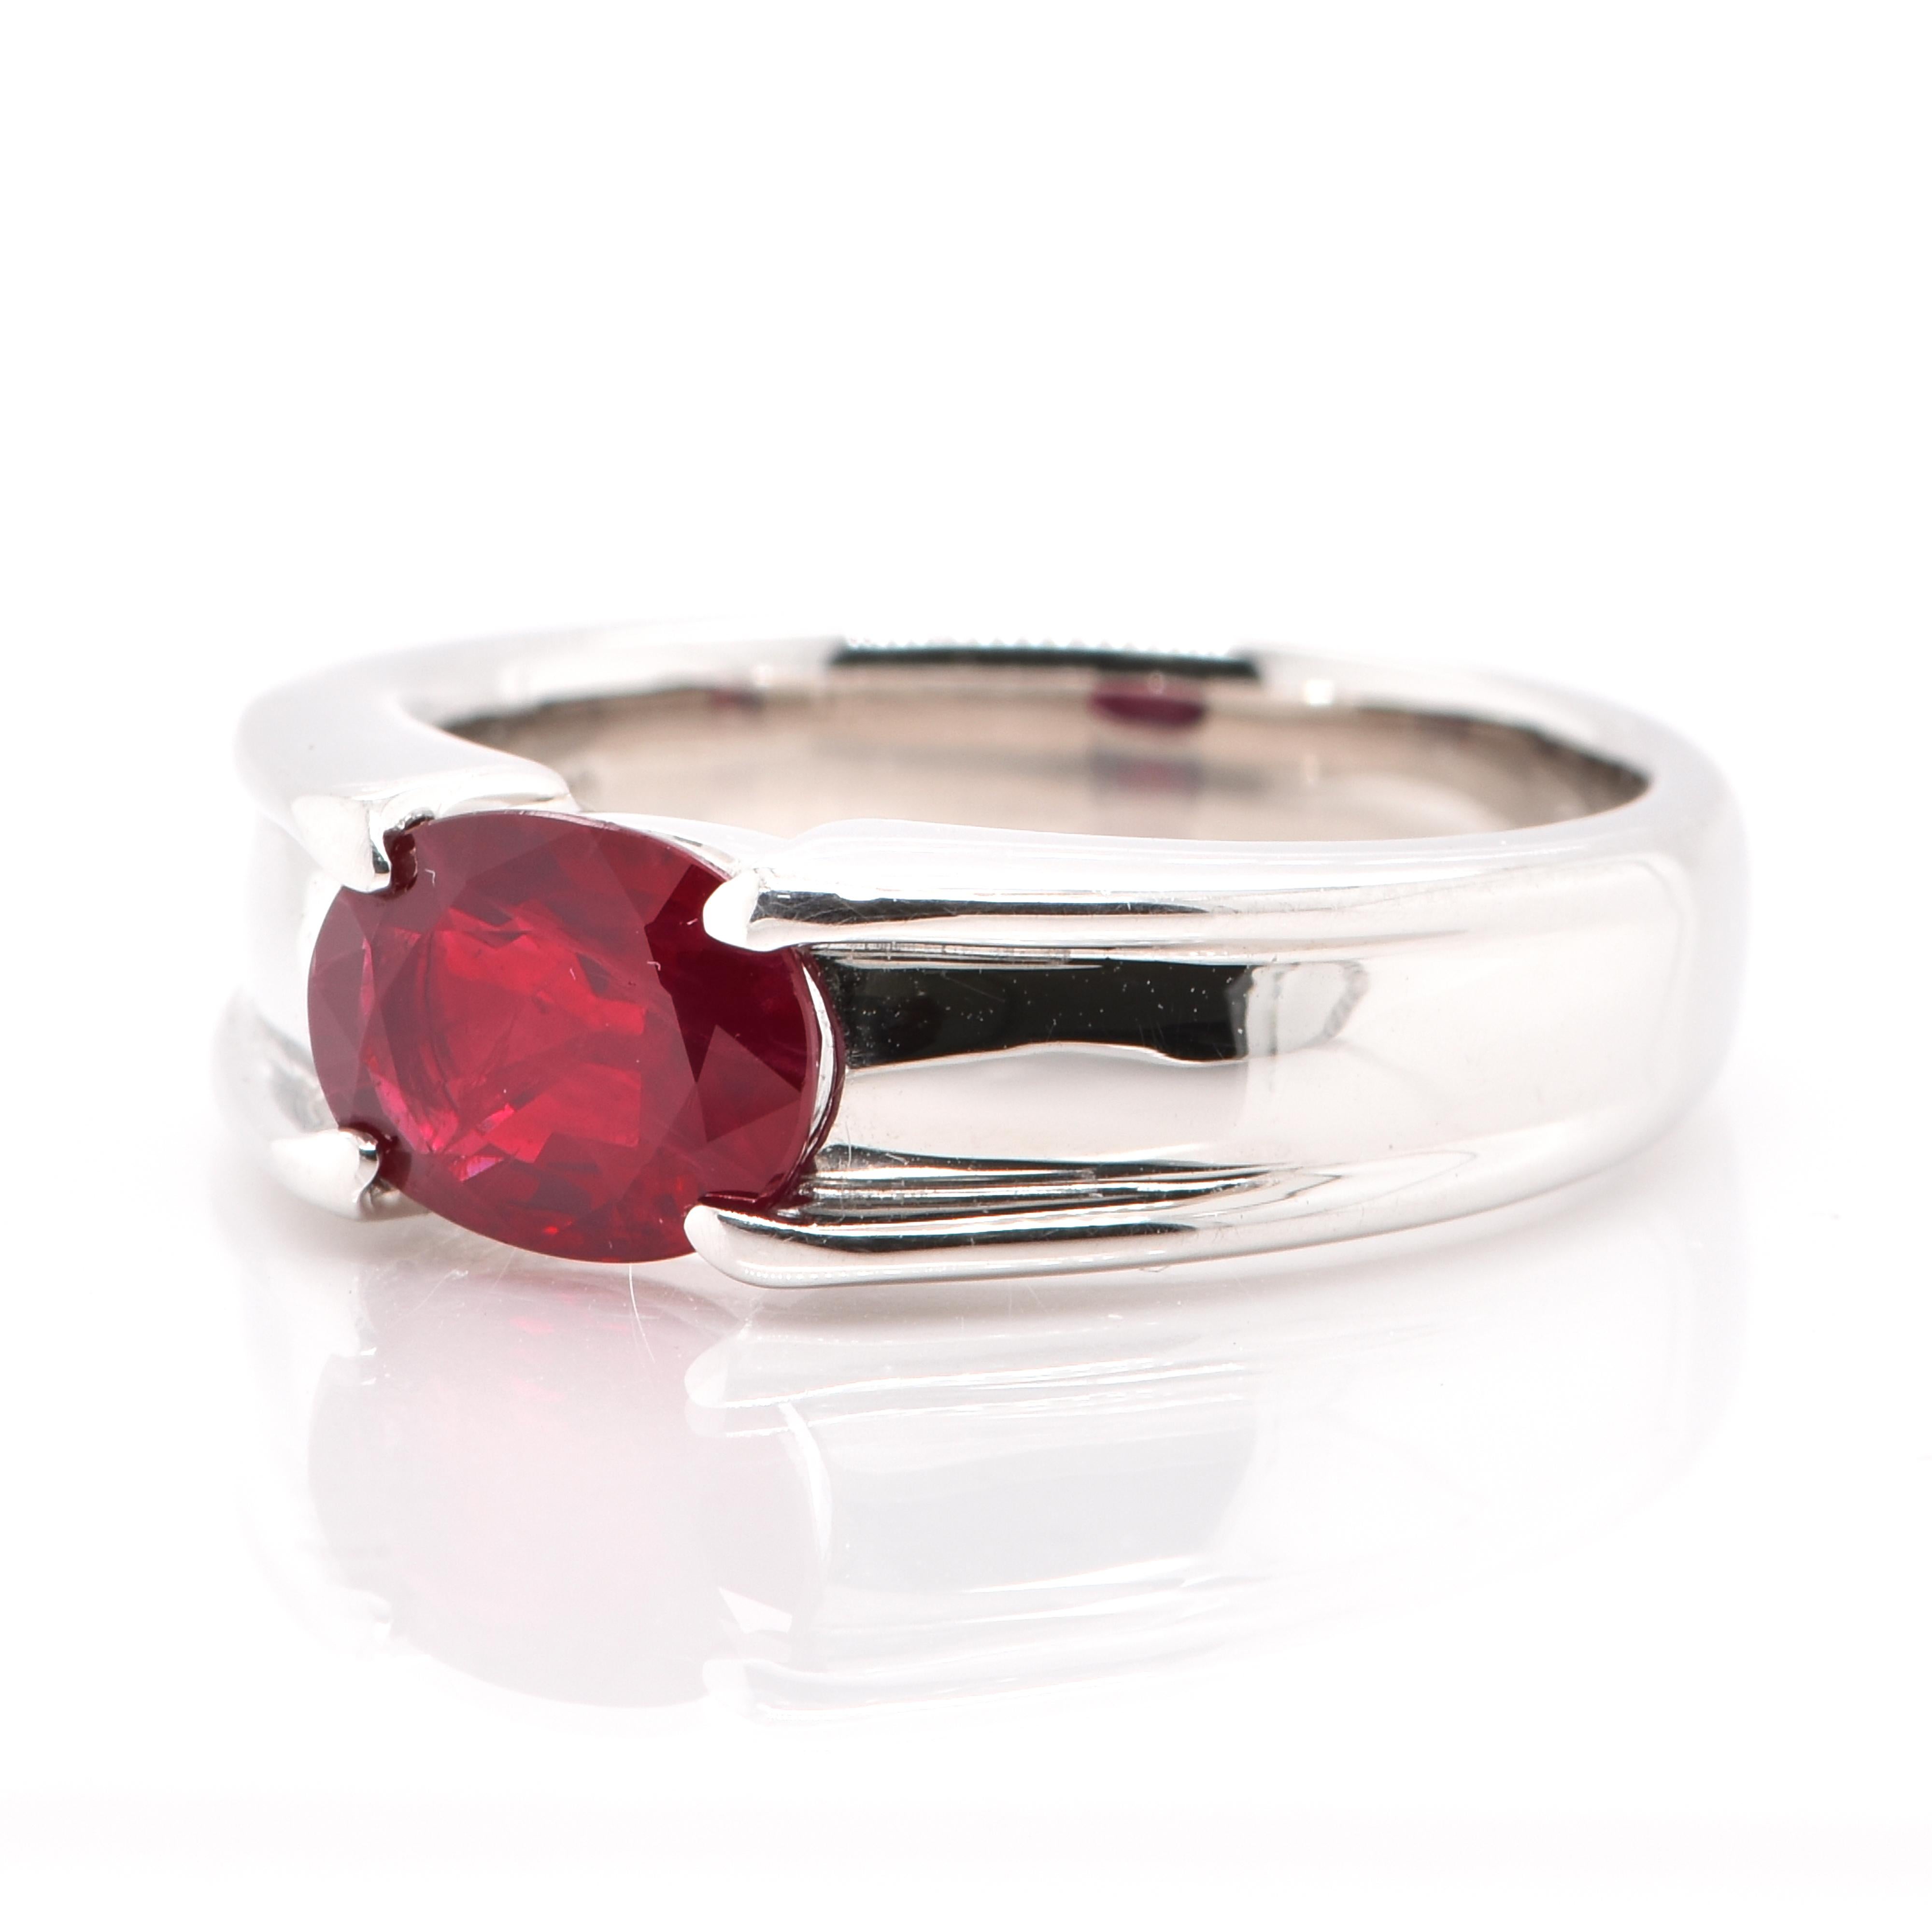 A beautiful Band Ring featuring a GRS Certified 2.01 Carat, Pigeon's Blood Color Ruby set in Platinum. The Ruby exhibits a deep red color known as Pigeon's Blood red. Rubies are referred to as 